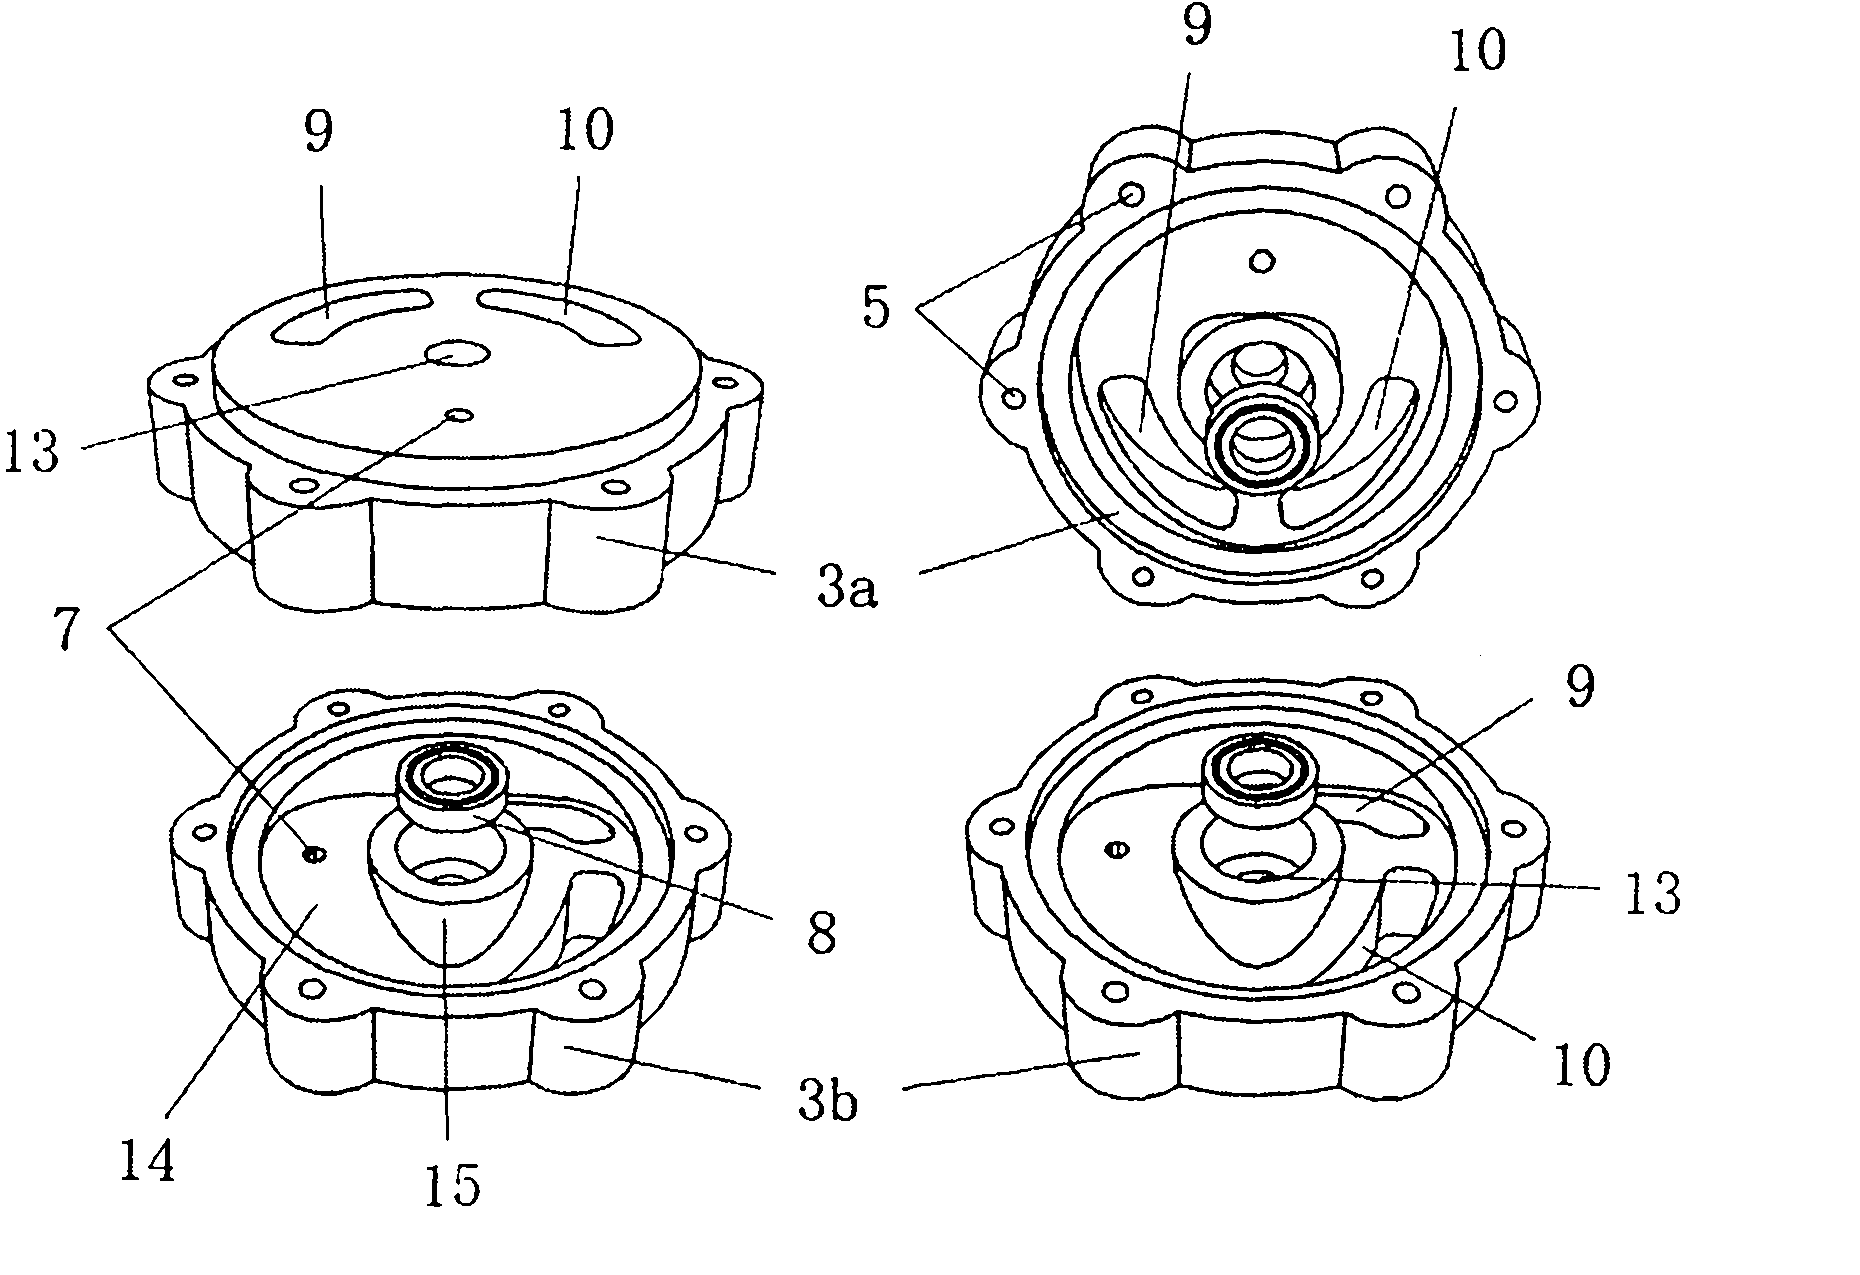 Displacement sliding rotary engine